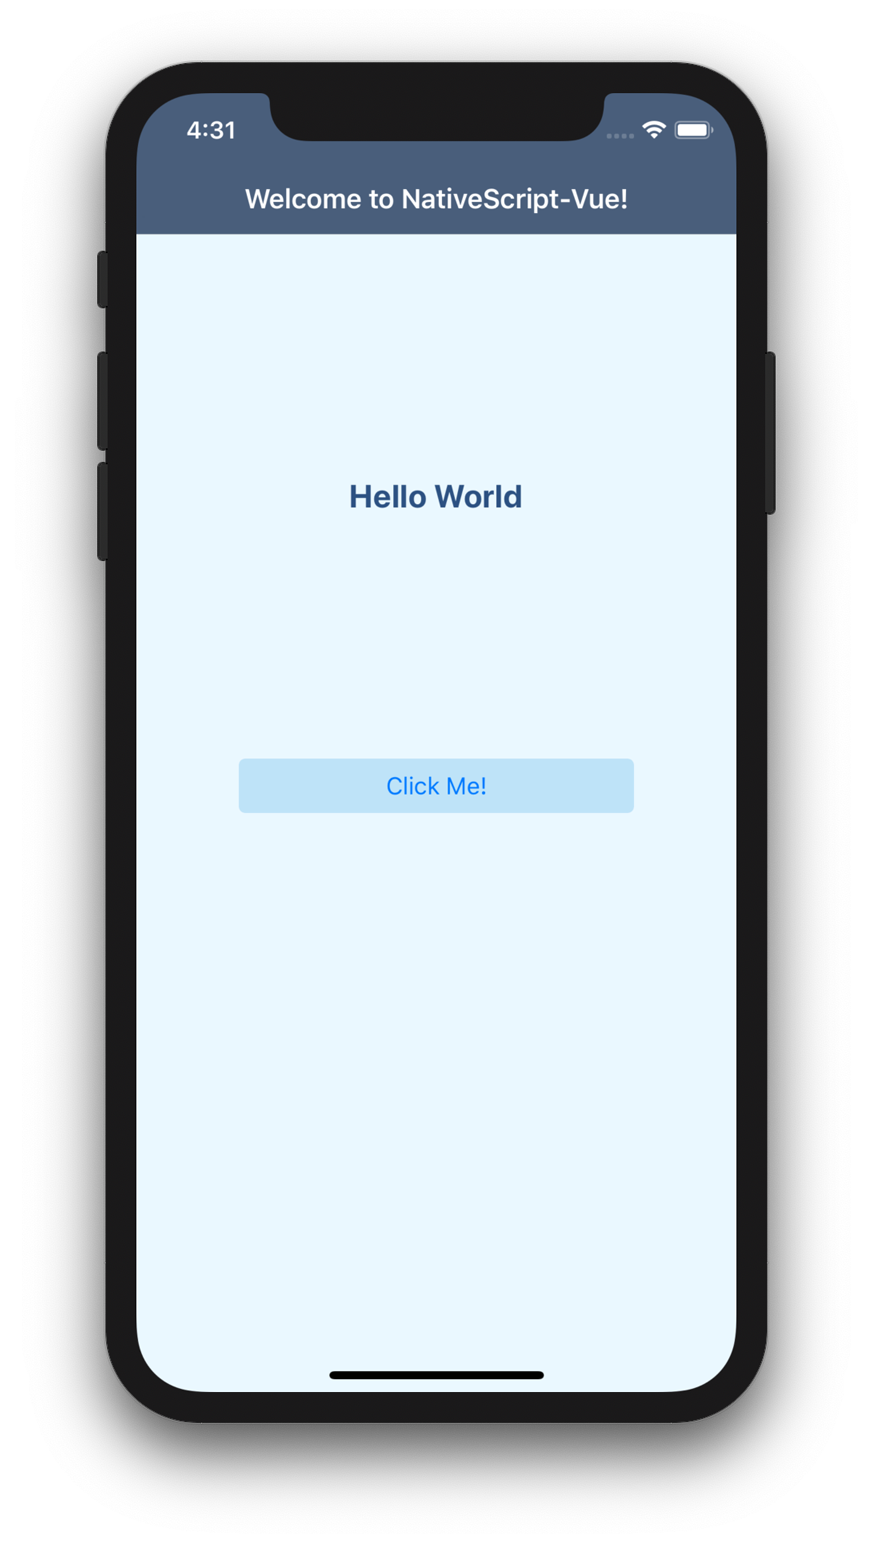 Screenshot of an iPhone simulator showing our custom landing page with "Hello World" text and a "Click Me" button.